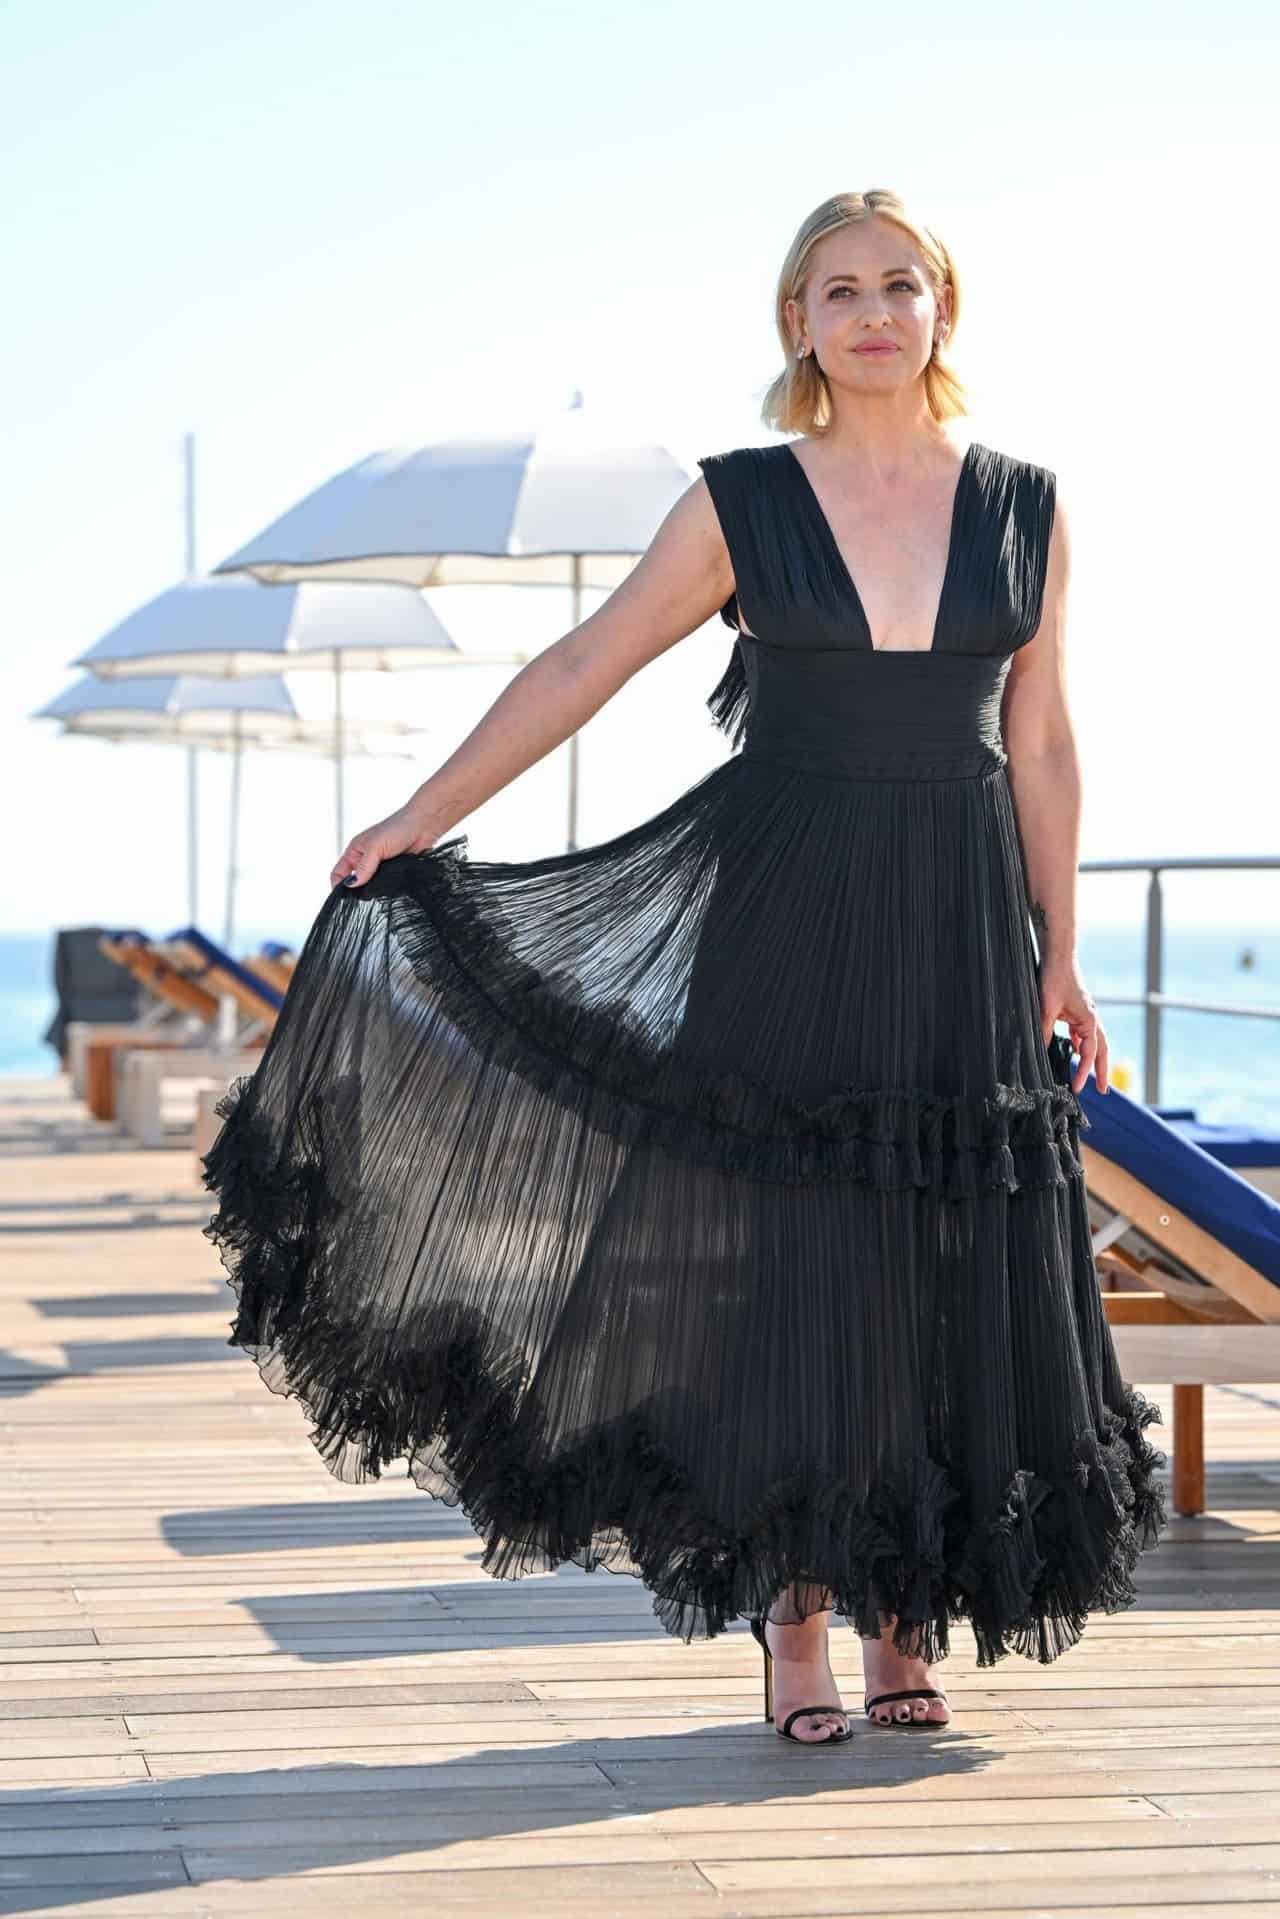 Sarah Michelle Gellar Posing in a Plunging Gown at Canneseries 2023